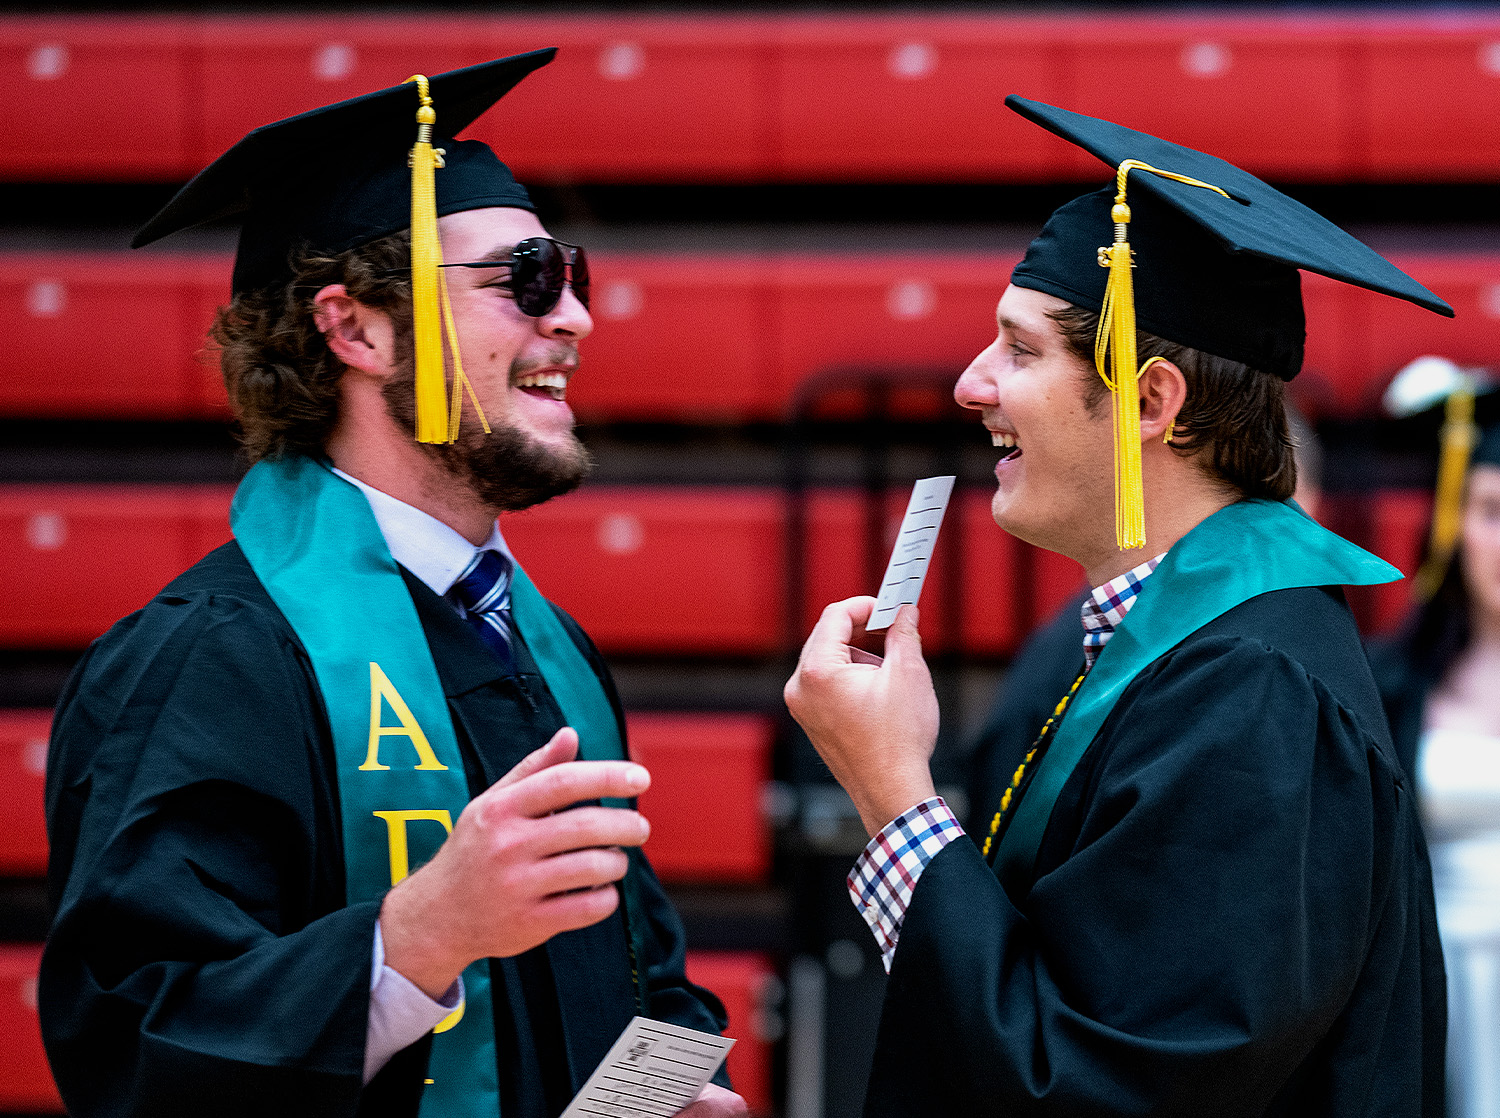 Two graduates talk to each other before the ceremony